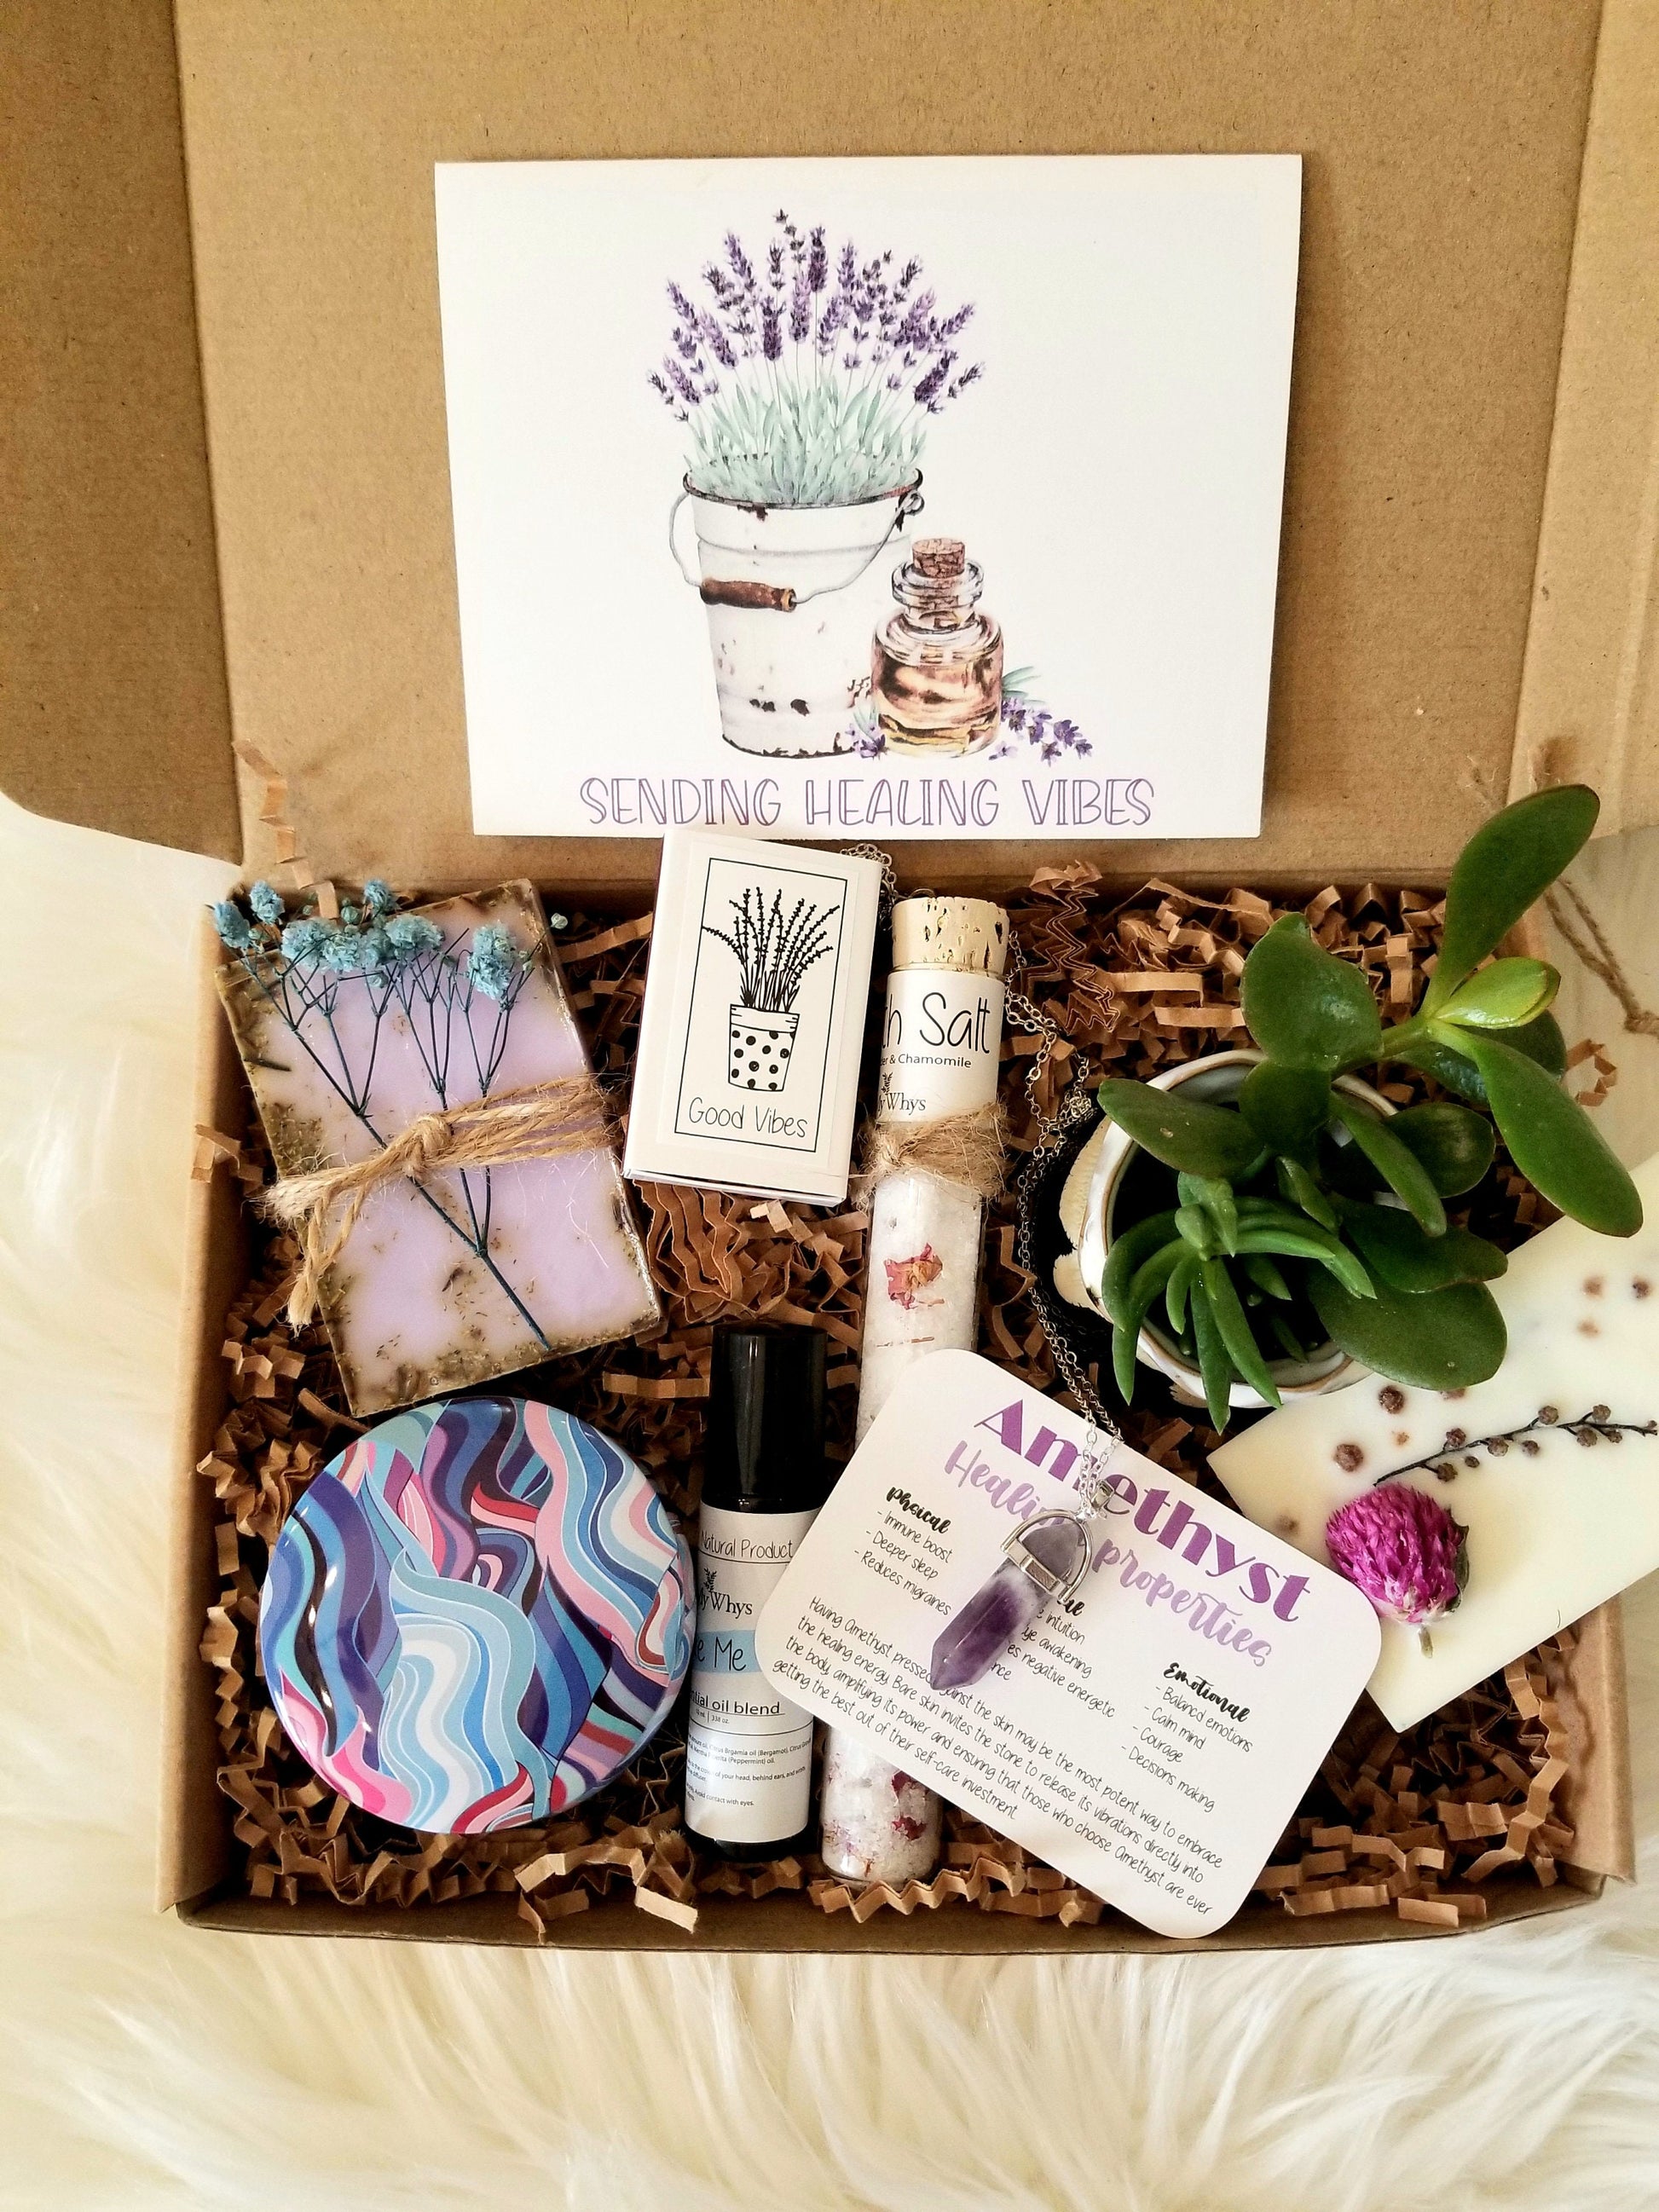 Sending healing vibes gift basket, Thinking of you care package